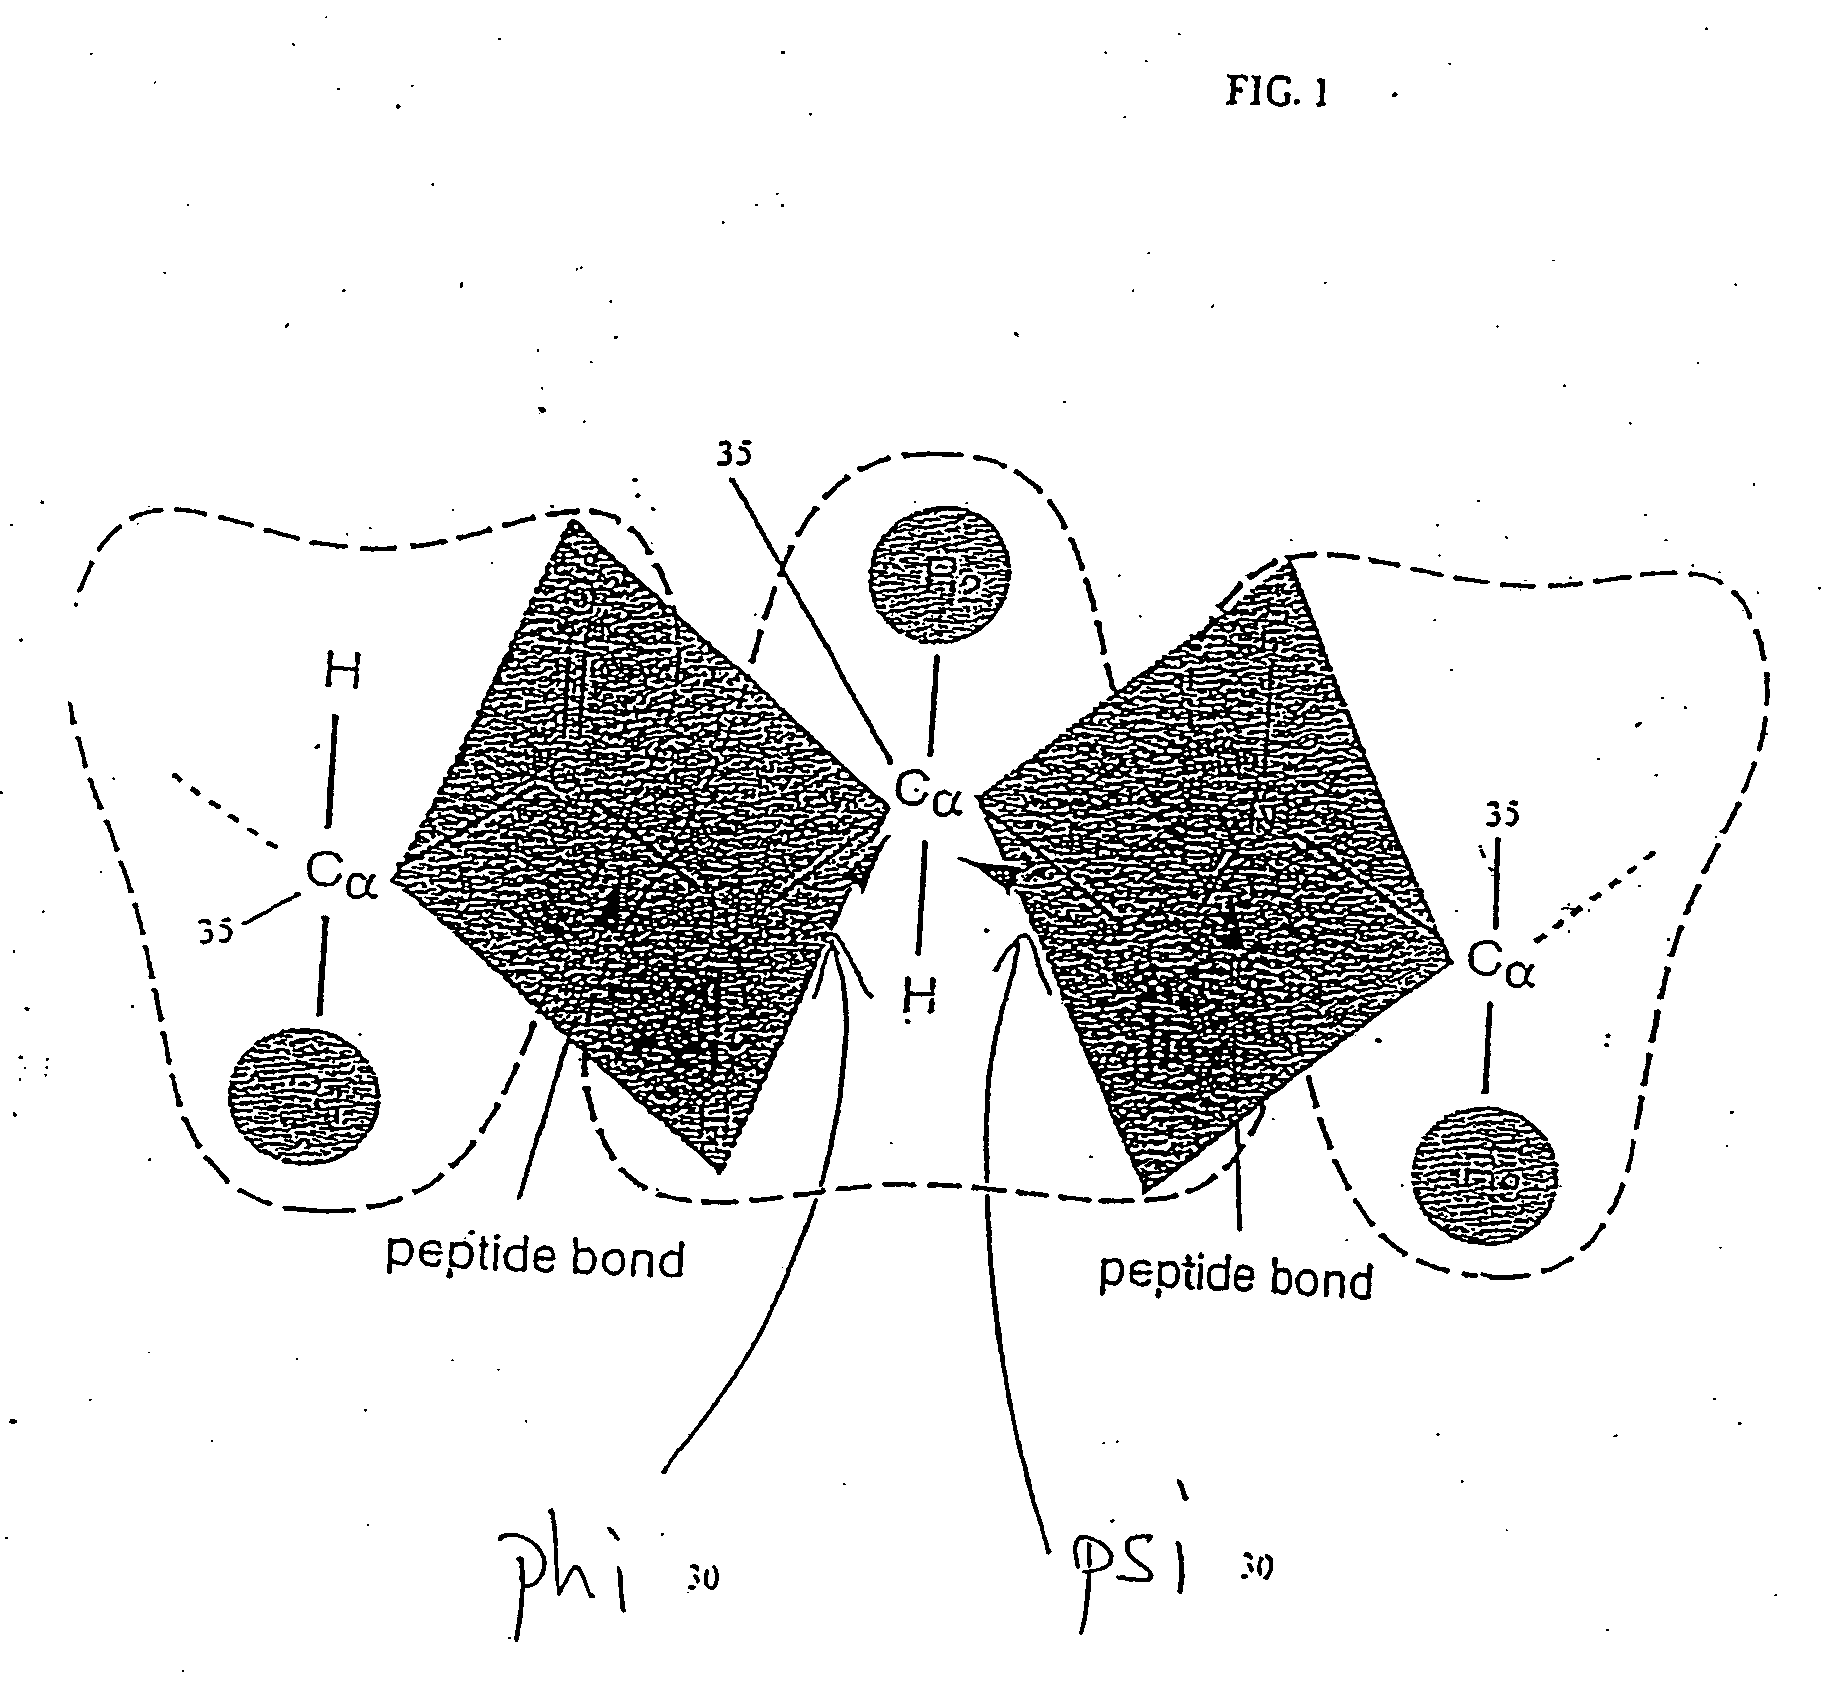 Method and system for designing proteins and protein backbone configurations